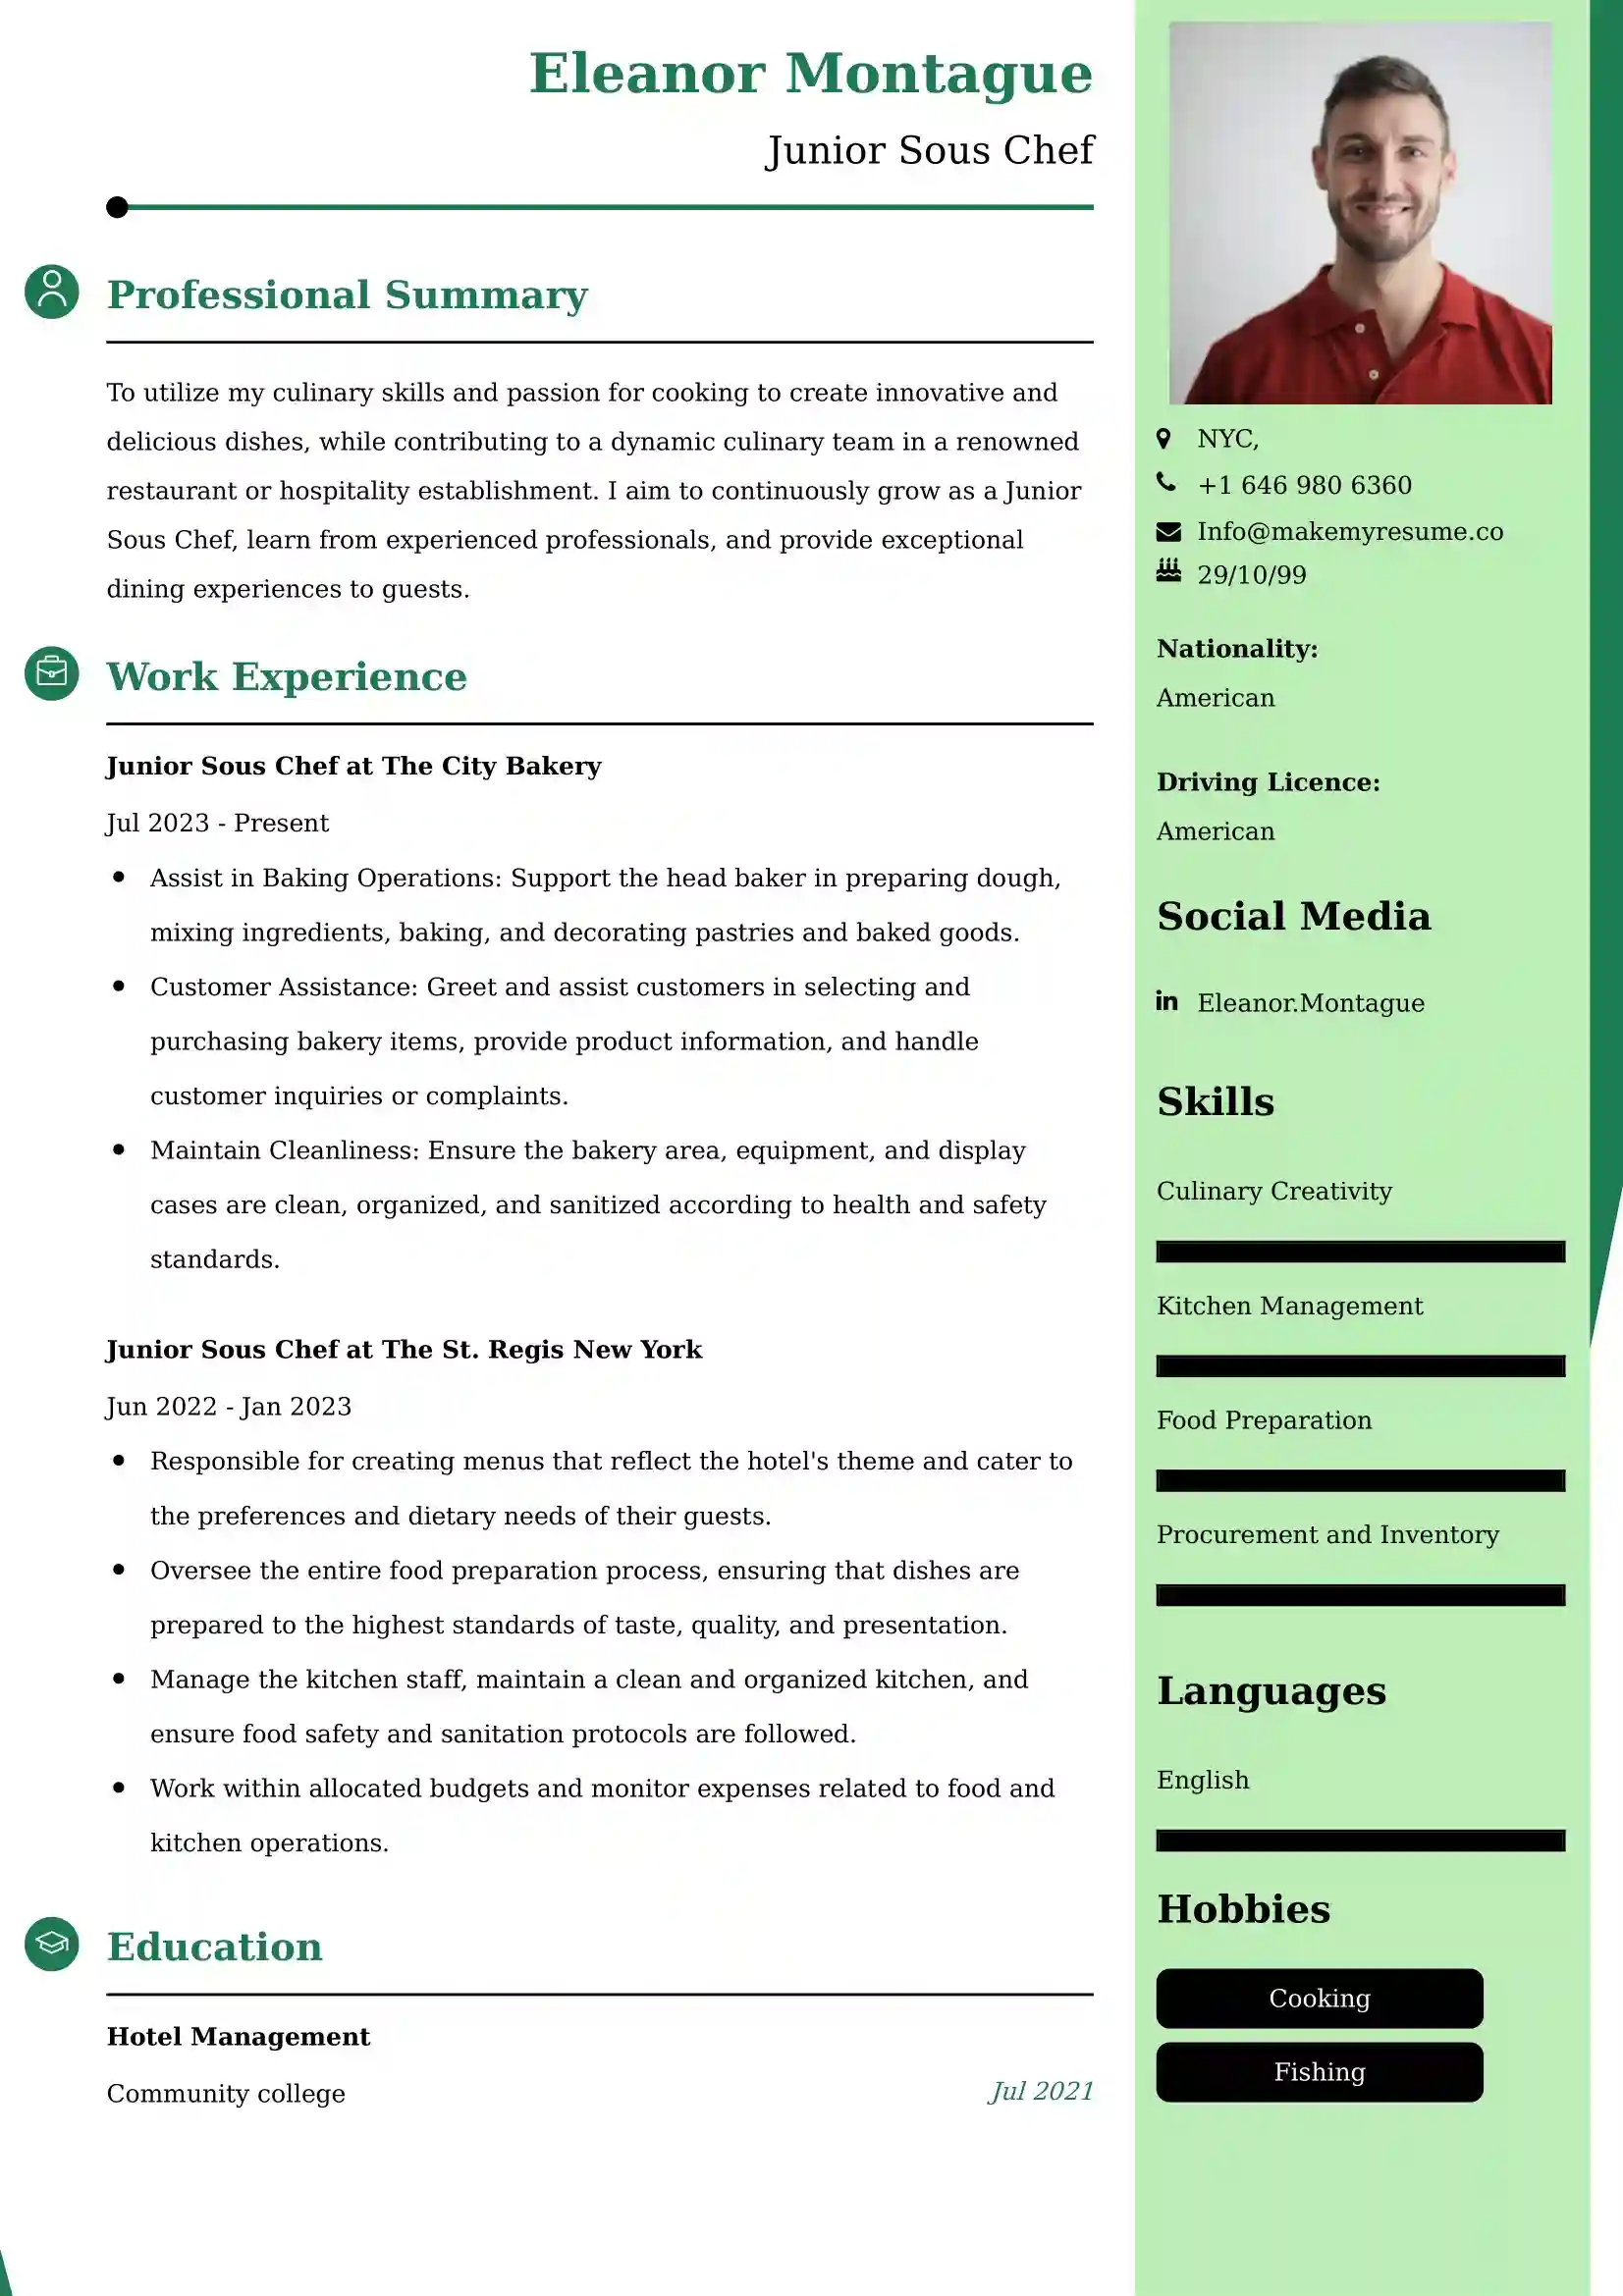 Junior Sous Chef Resume Examples - UAE Format and Tips.